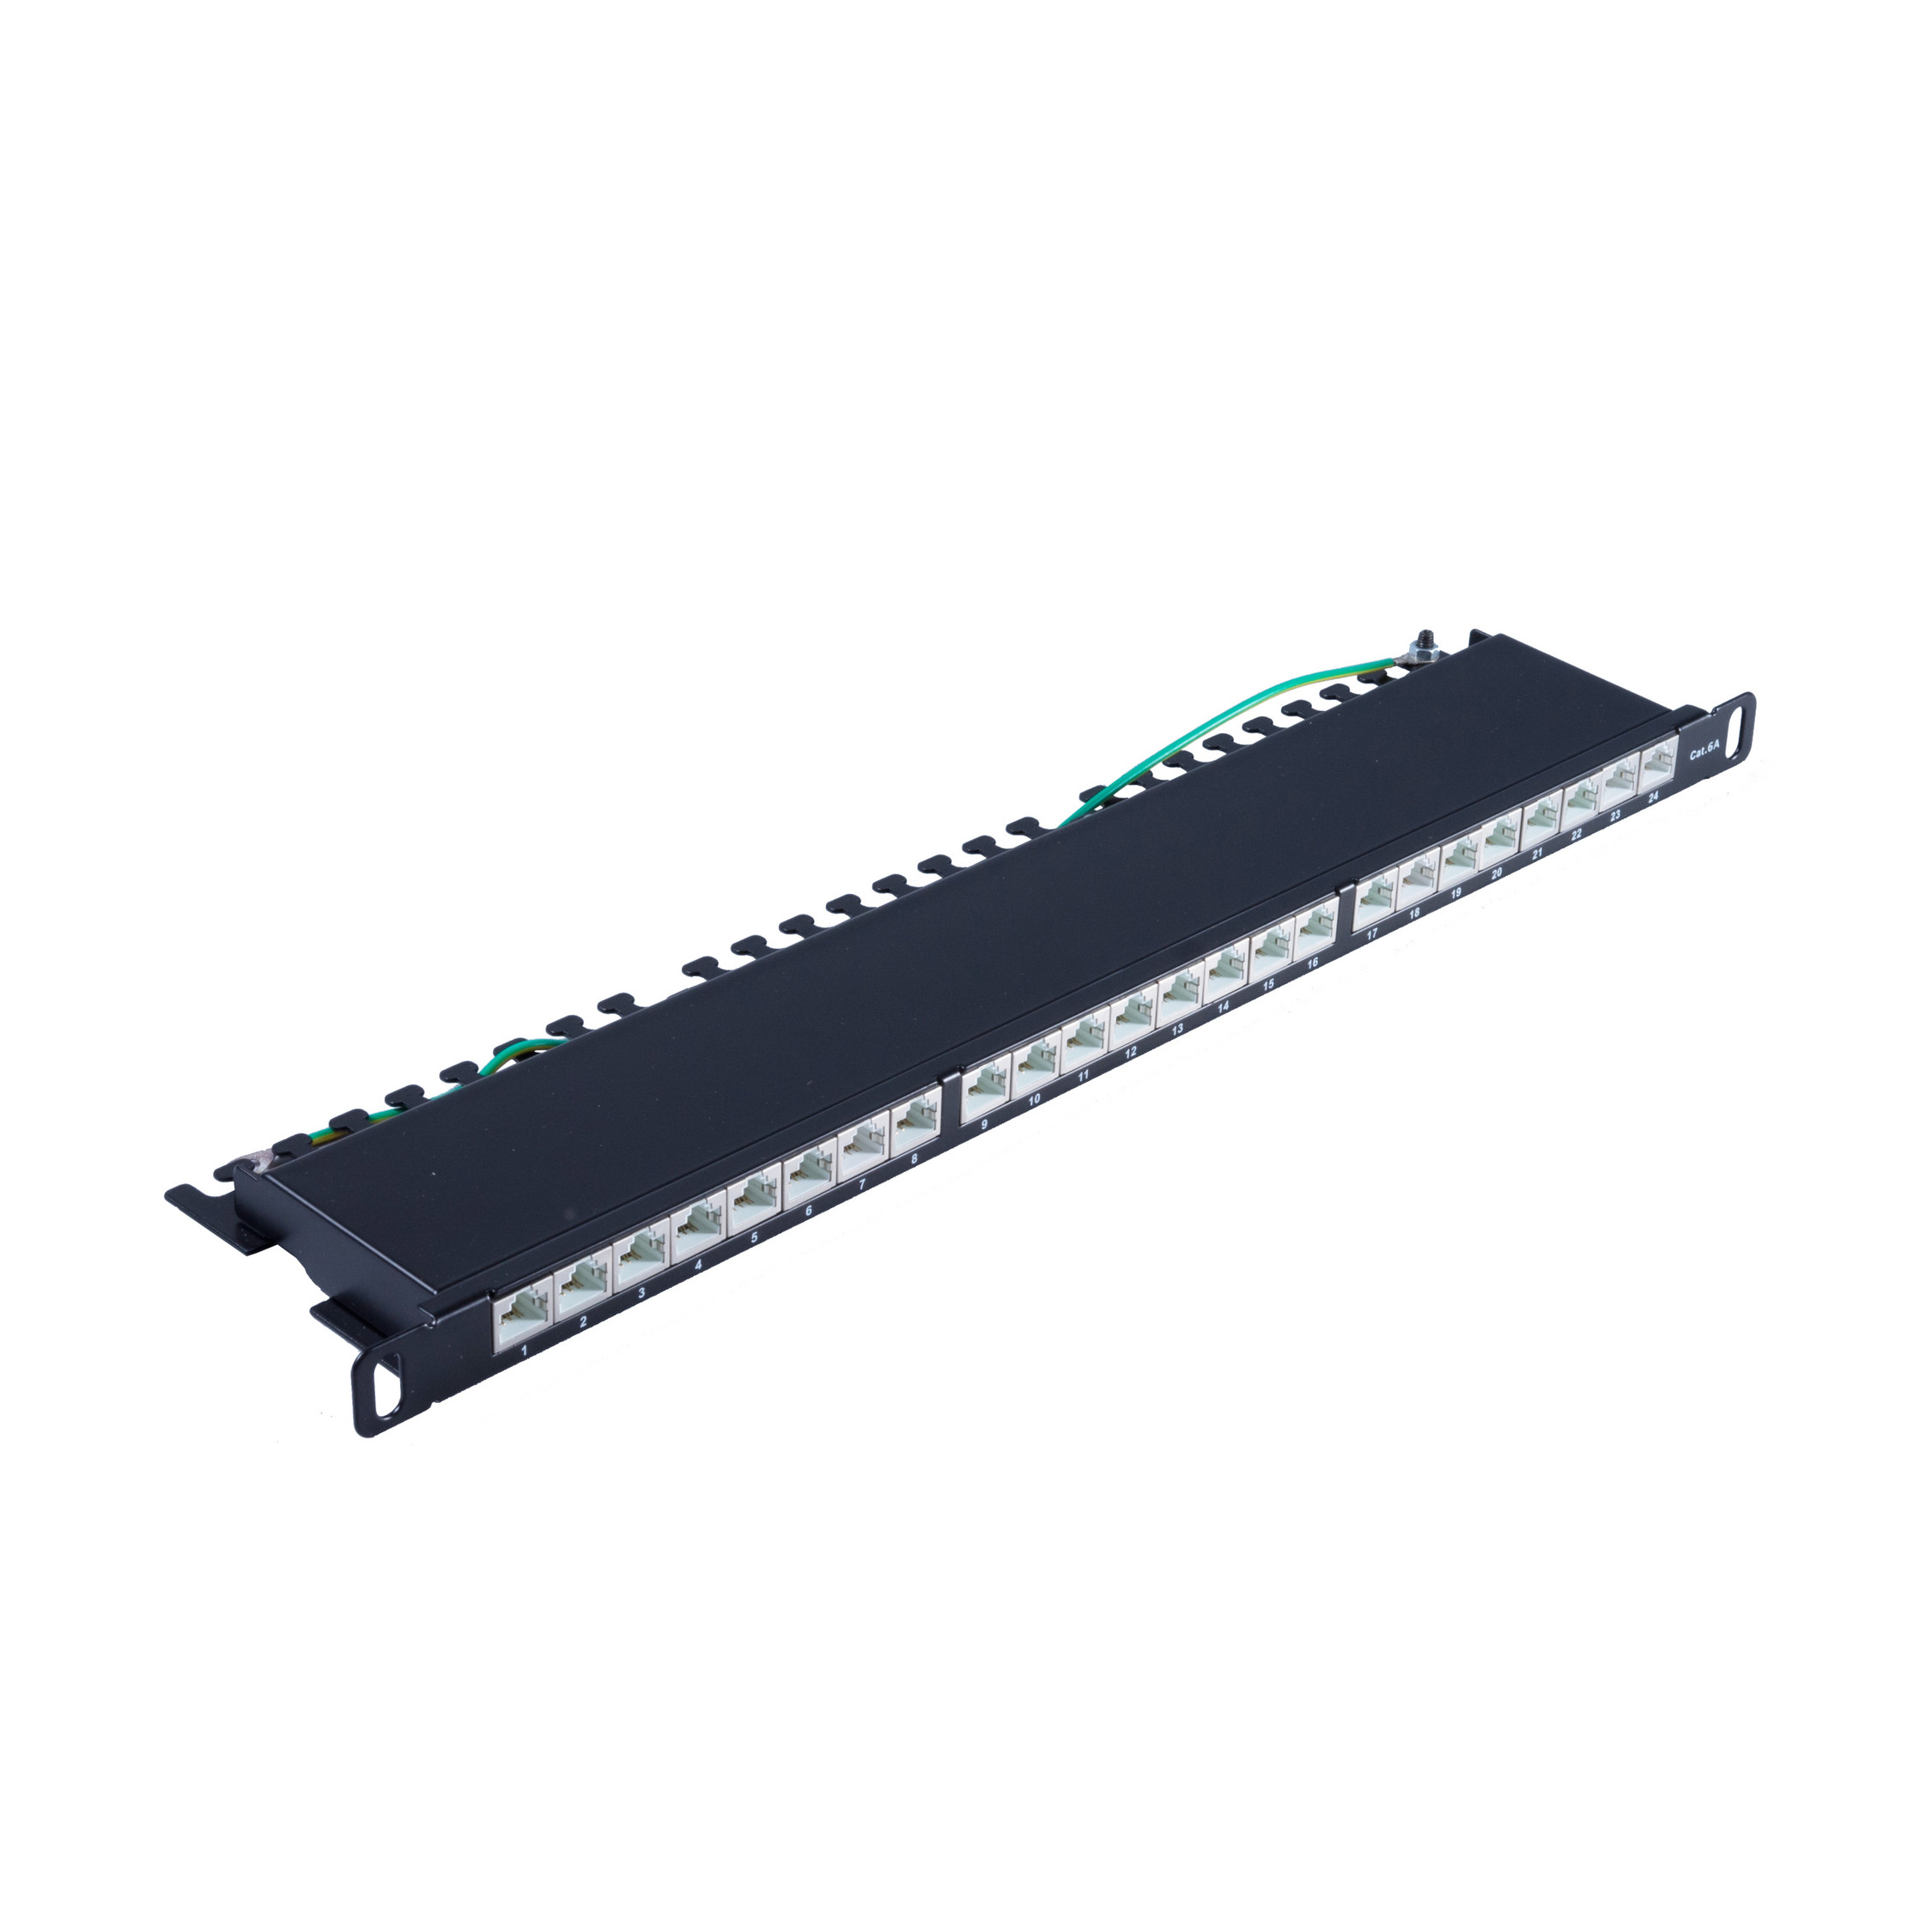 SHIVERPEAKS Slim Patchpanel Cat.6A, 19” 24 0,5HE, Port Patchpanel